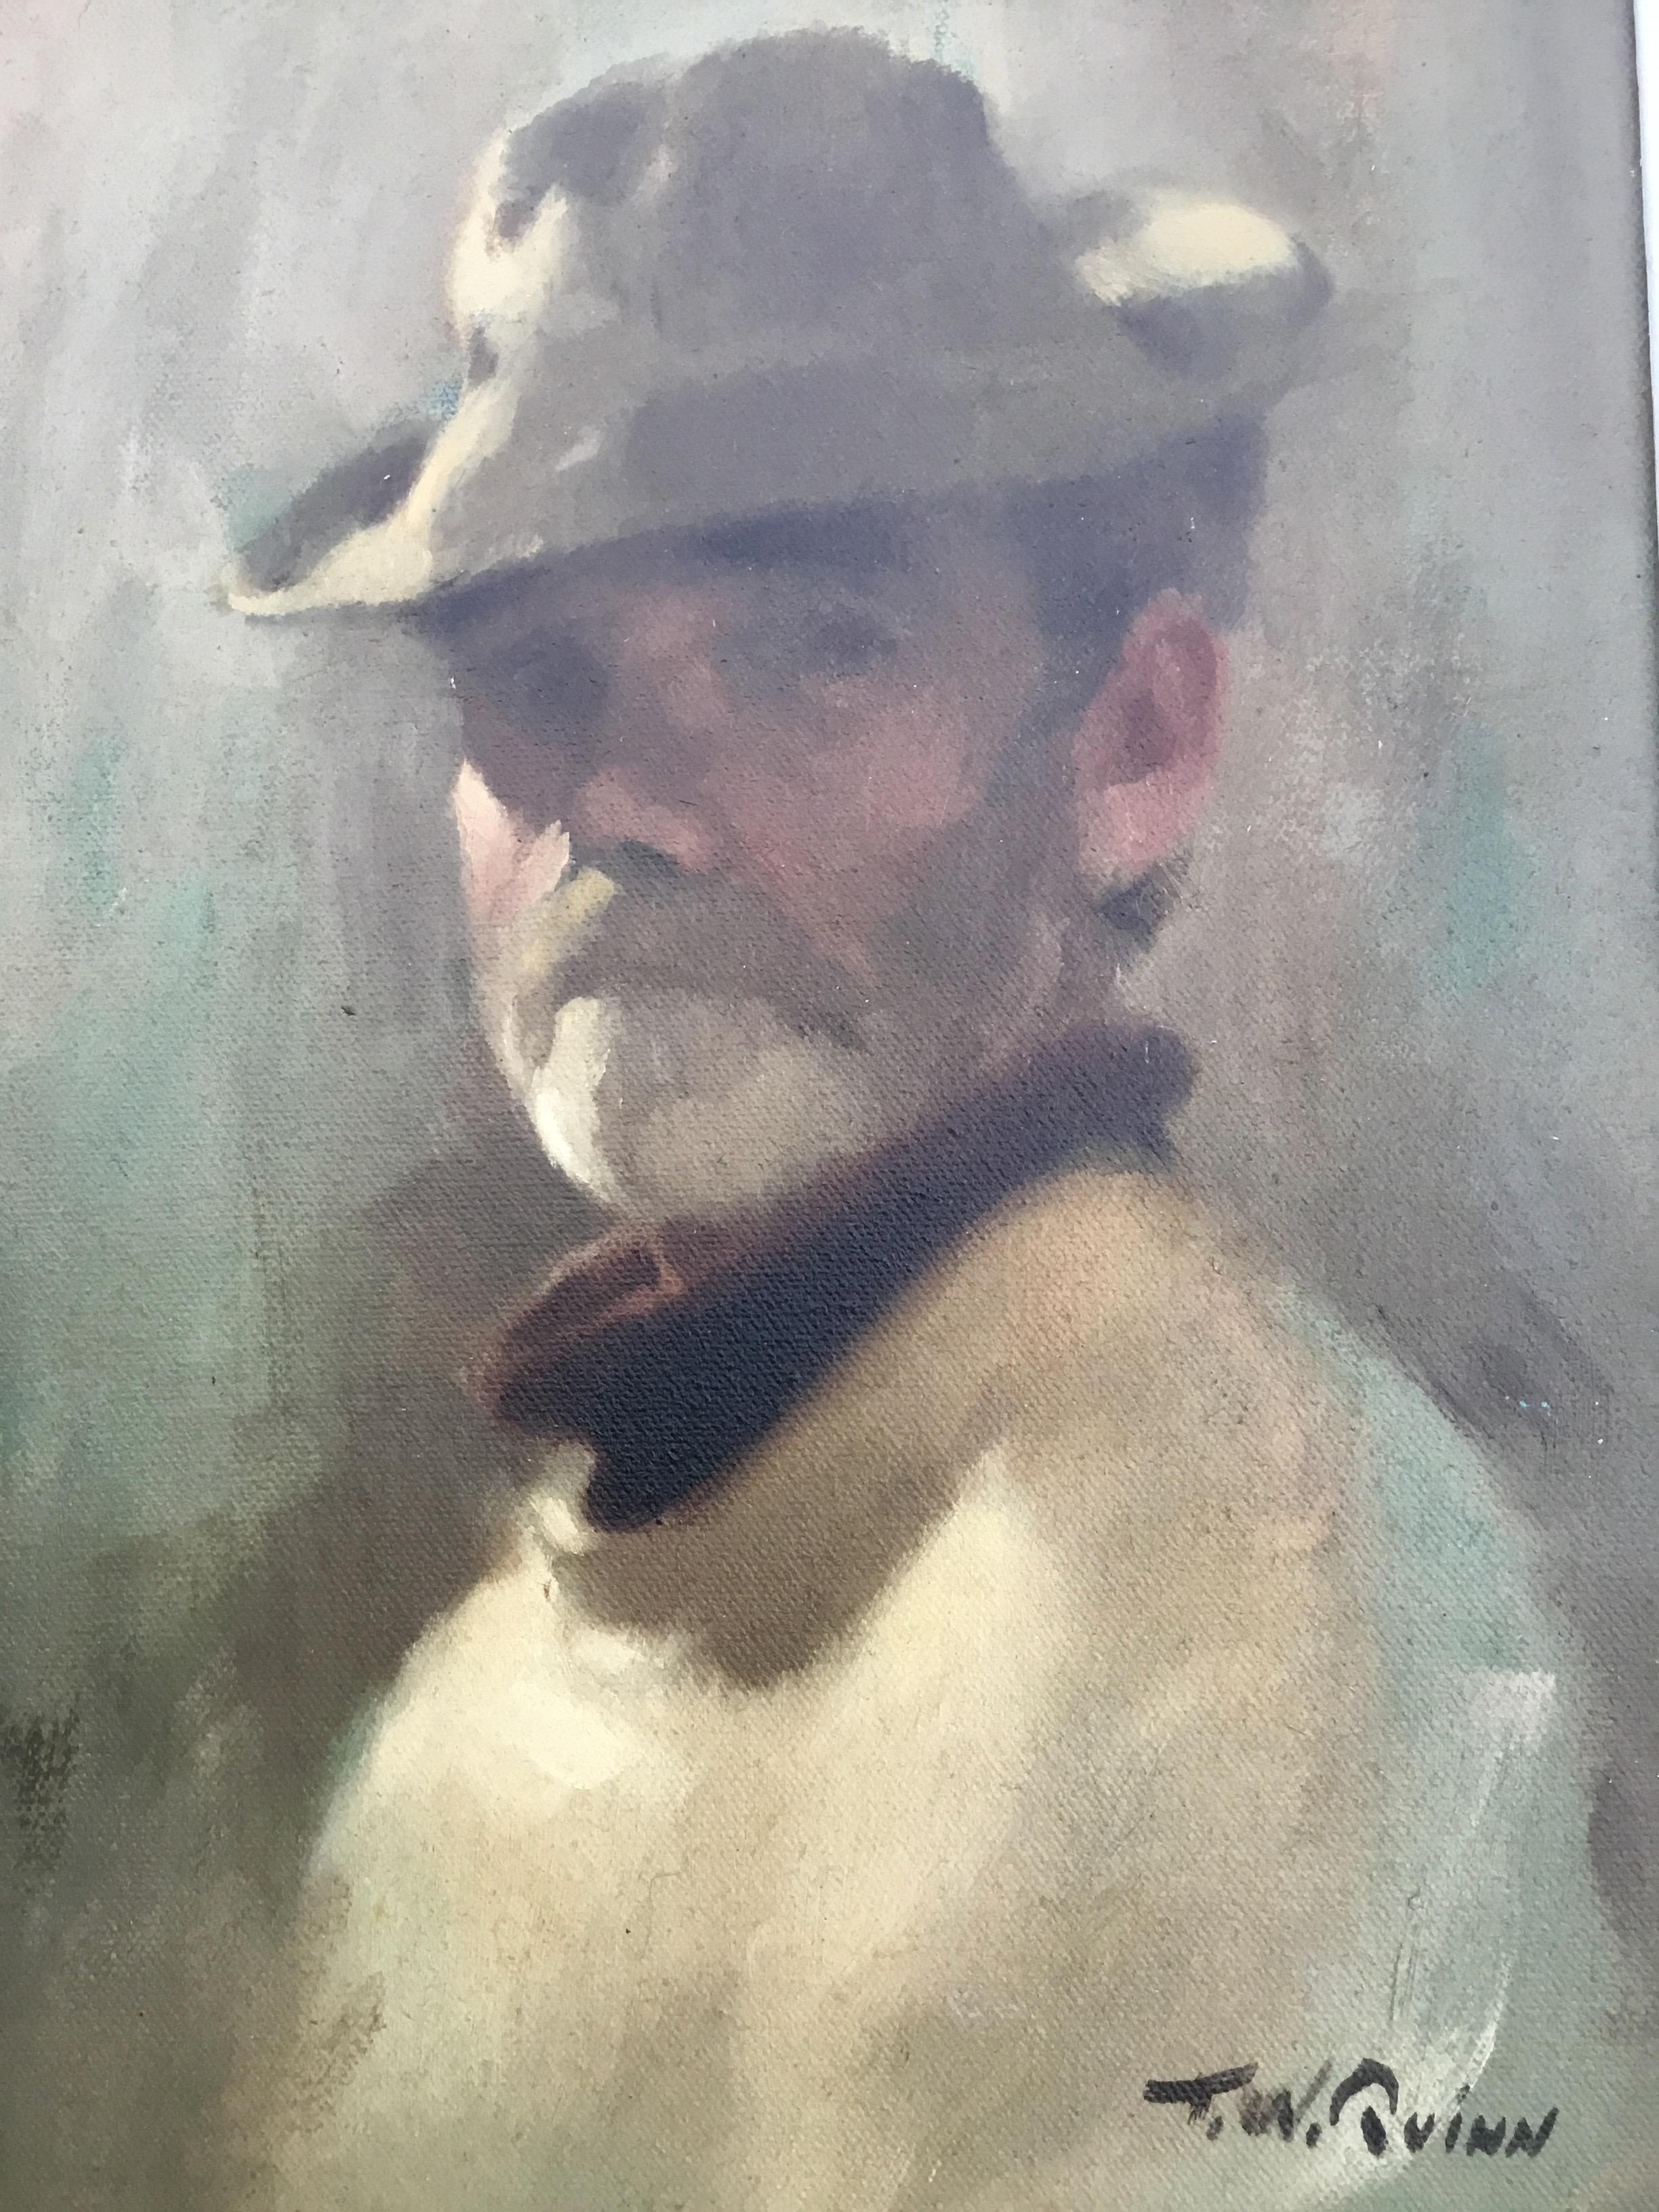 TOM QUINN
Born of IRISH PARENTS in 1918, Tom W. Quinn was indeed fortunate as he was one of the last generations of students at the Camberwell School of Art to study under such great tutors as Lawrence Gowing, Victor Passmore, William Coldstream,